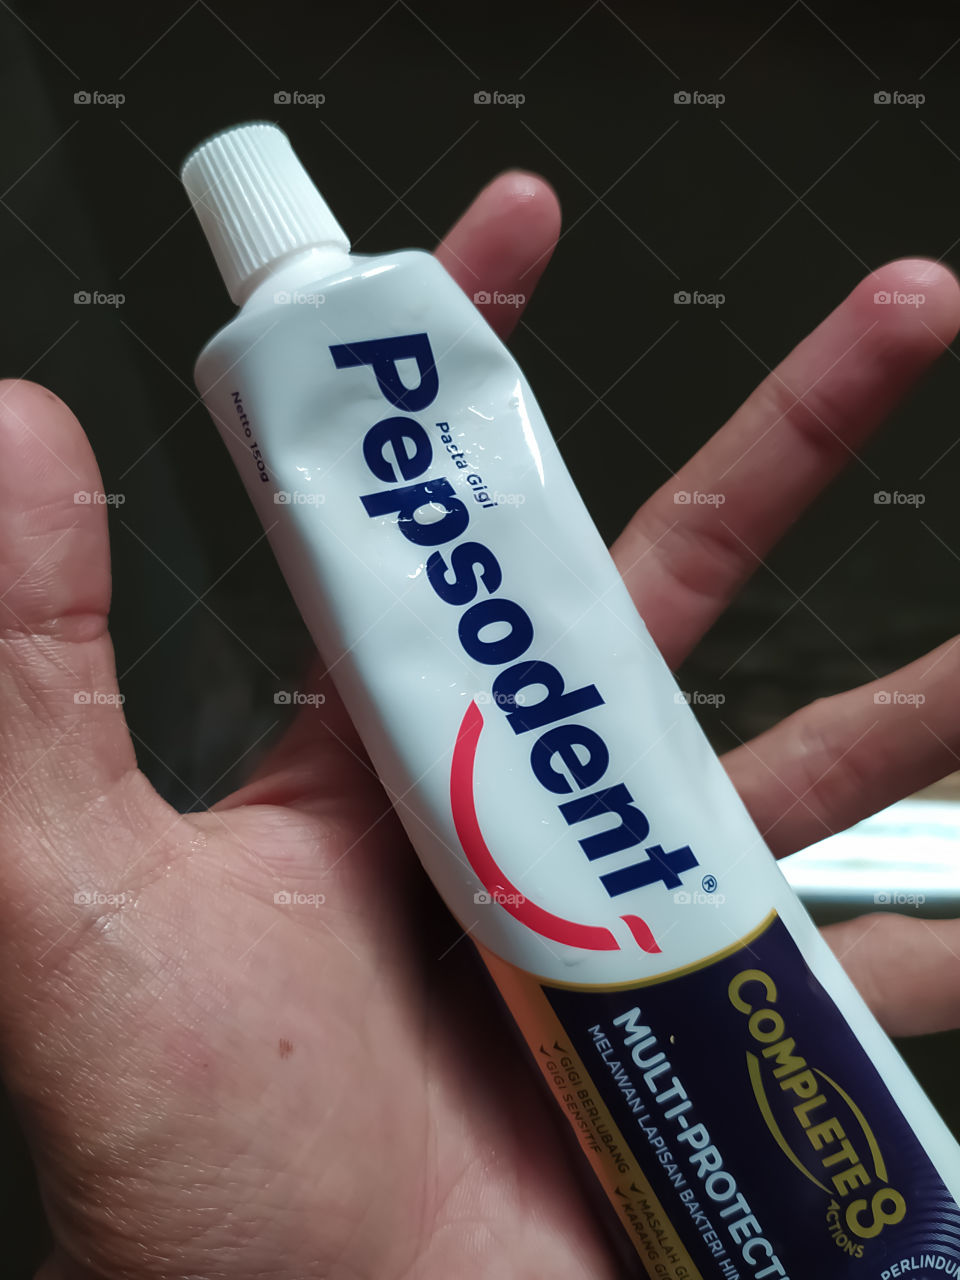 Bengkulu, Indonesia - July 29, 2021 - Pepsodent toothpaste on hand